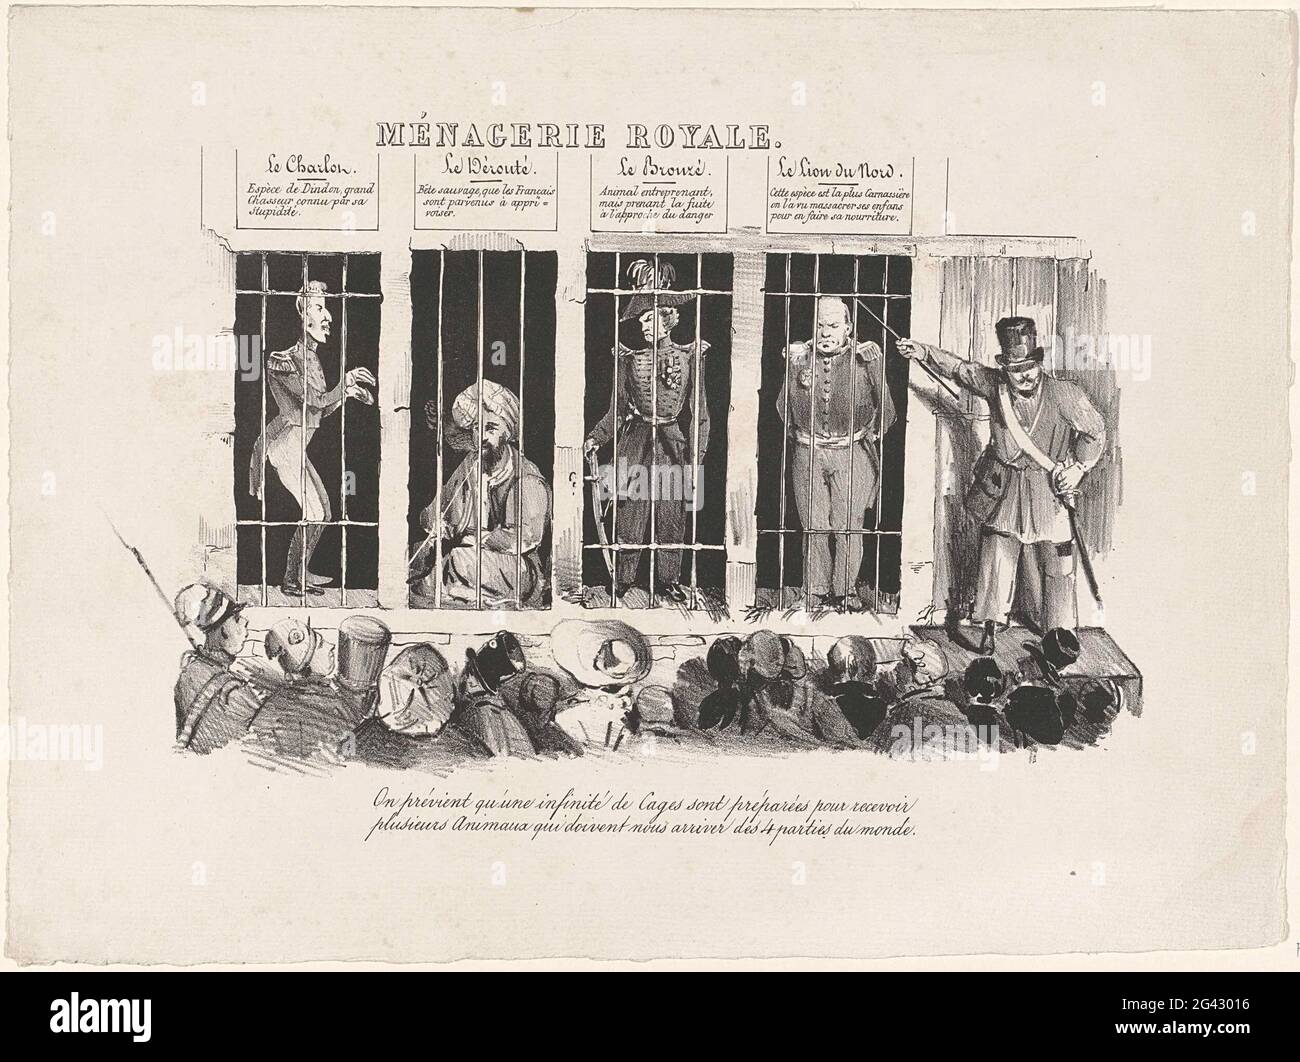 Royal menagerie, 1830; Ménagerie Royale. Cartoon in which Jambe de Bois shows four cages with wild animals on the Belgian public. There is a tracted prince in every cage. On the right King Willem I as a 'Le Lion du Nord'. In the other three cages, 'Le Charlon' (Karel X), 'Le Dérouté (Hussein Dey van Algiers) and' Le Bronzé '(Karel II Hertog van Brunswijk). With two-legged caption. Stock Photo